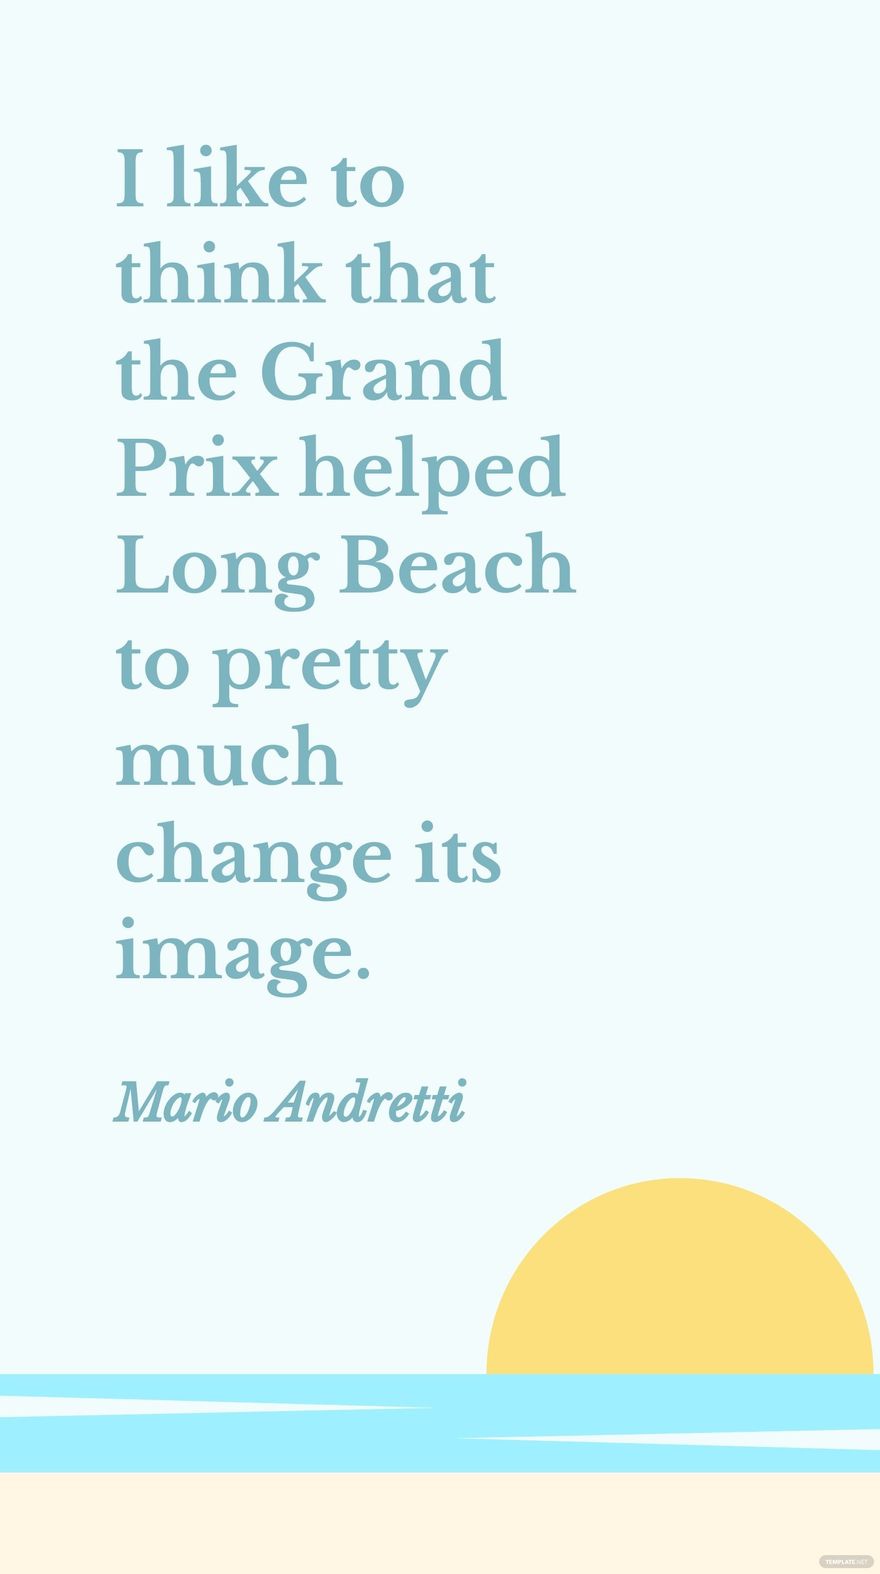 Free Mario Andretti - I like to think that the Grand Prix helped Long Beach to pretty much change its image.